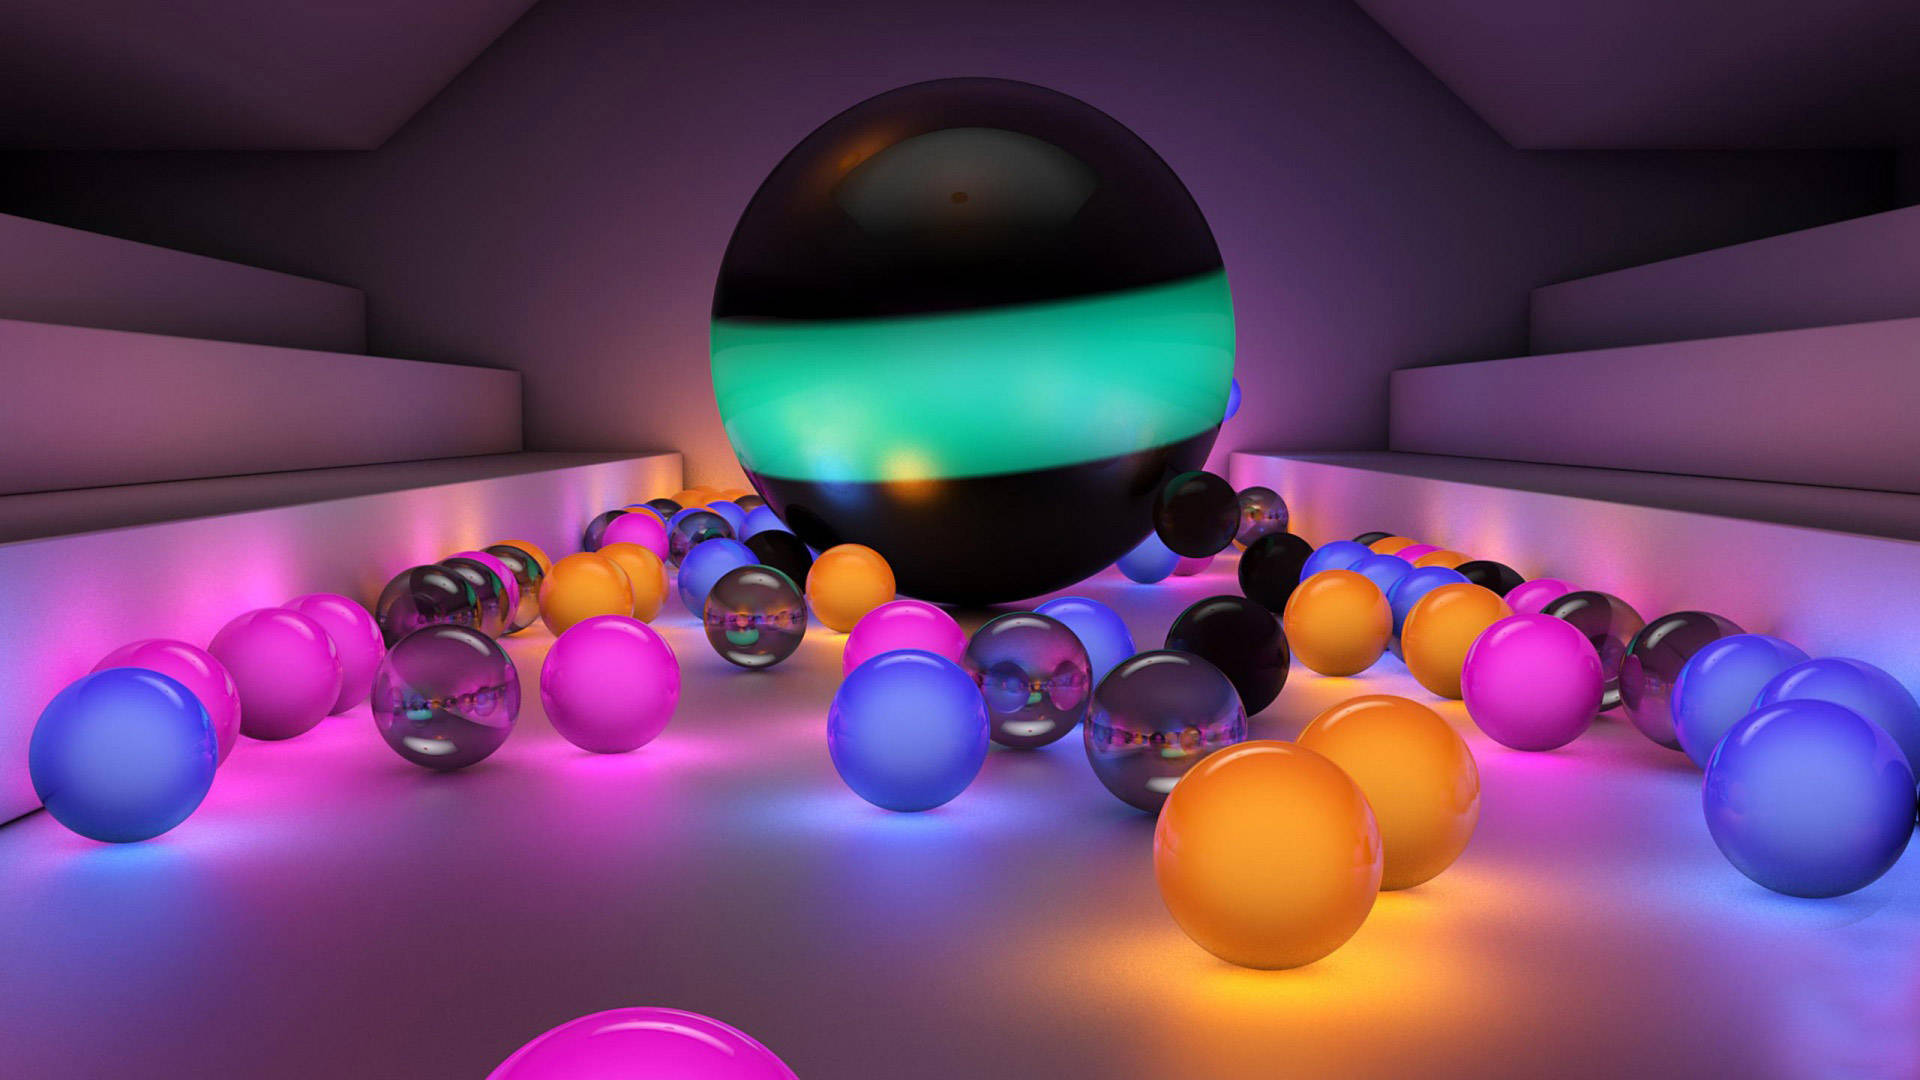 Full Hd Tablet Glowing Balls Background